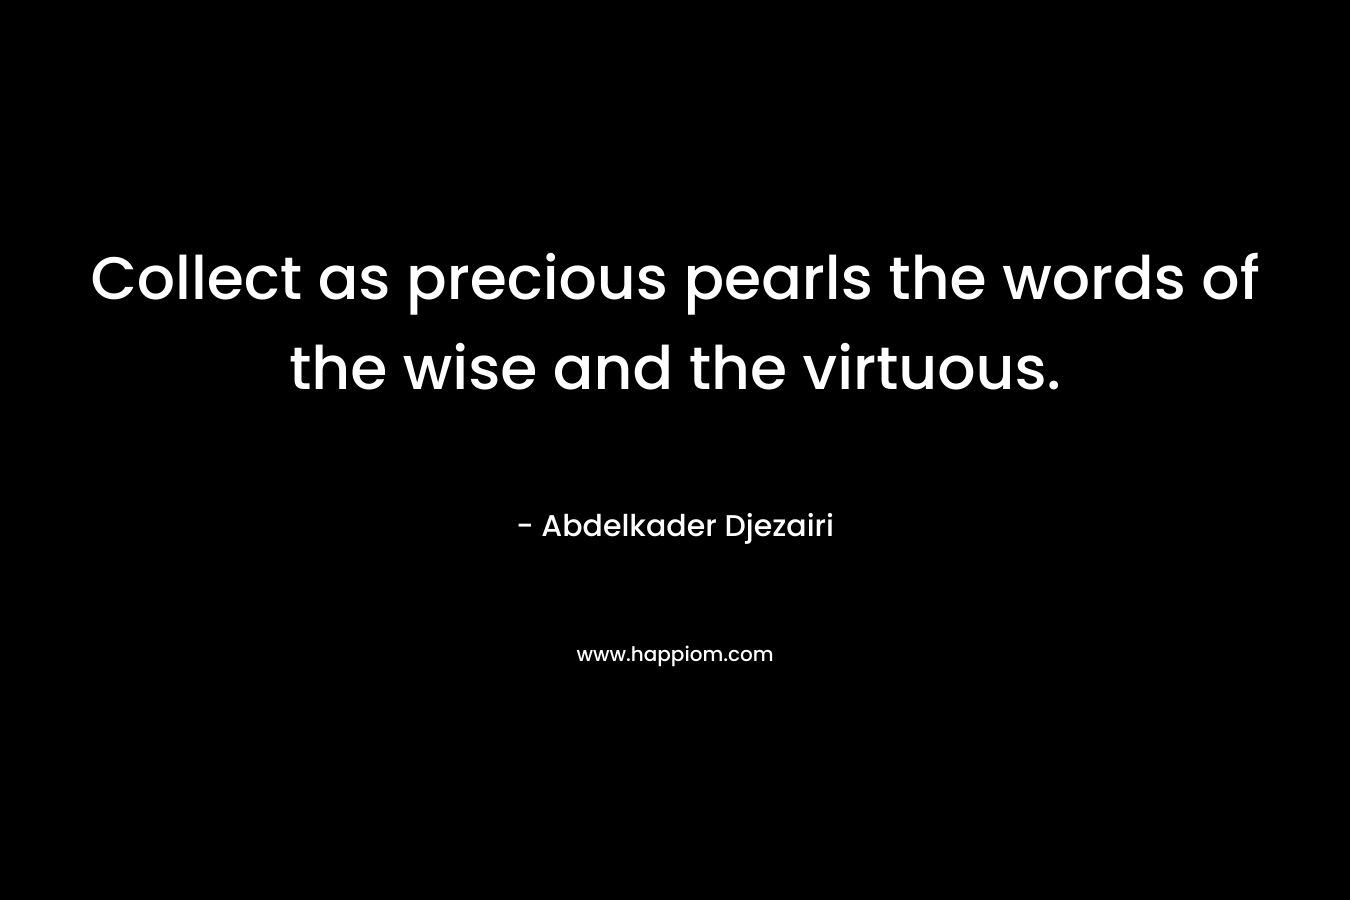 Collect as precious pearls the words of the wise and the virtuous. – Abdelkader Djezairi